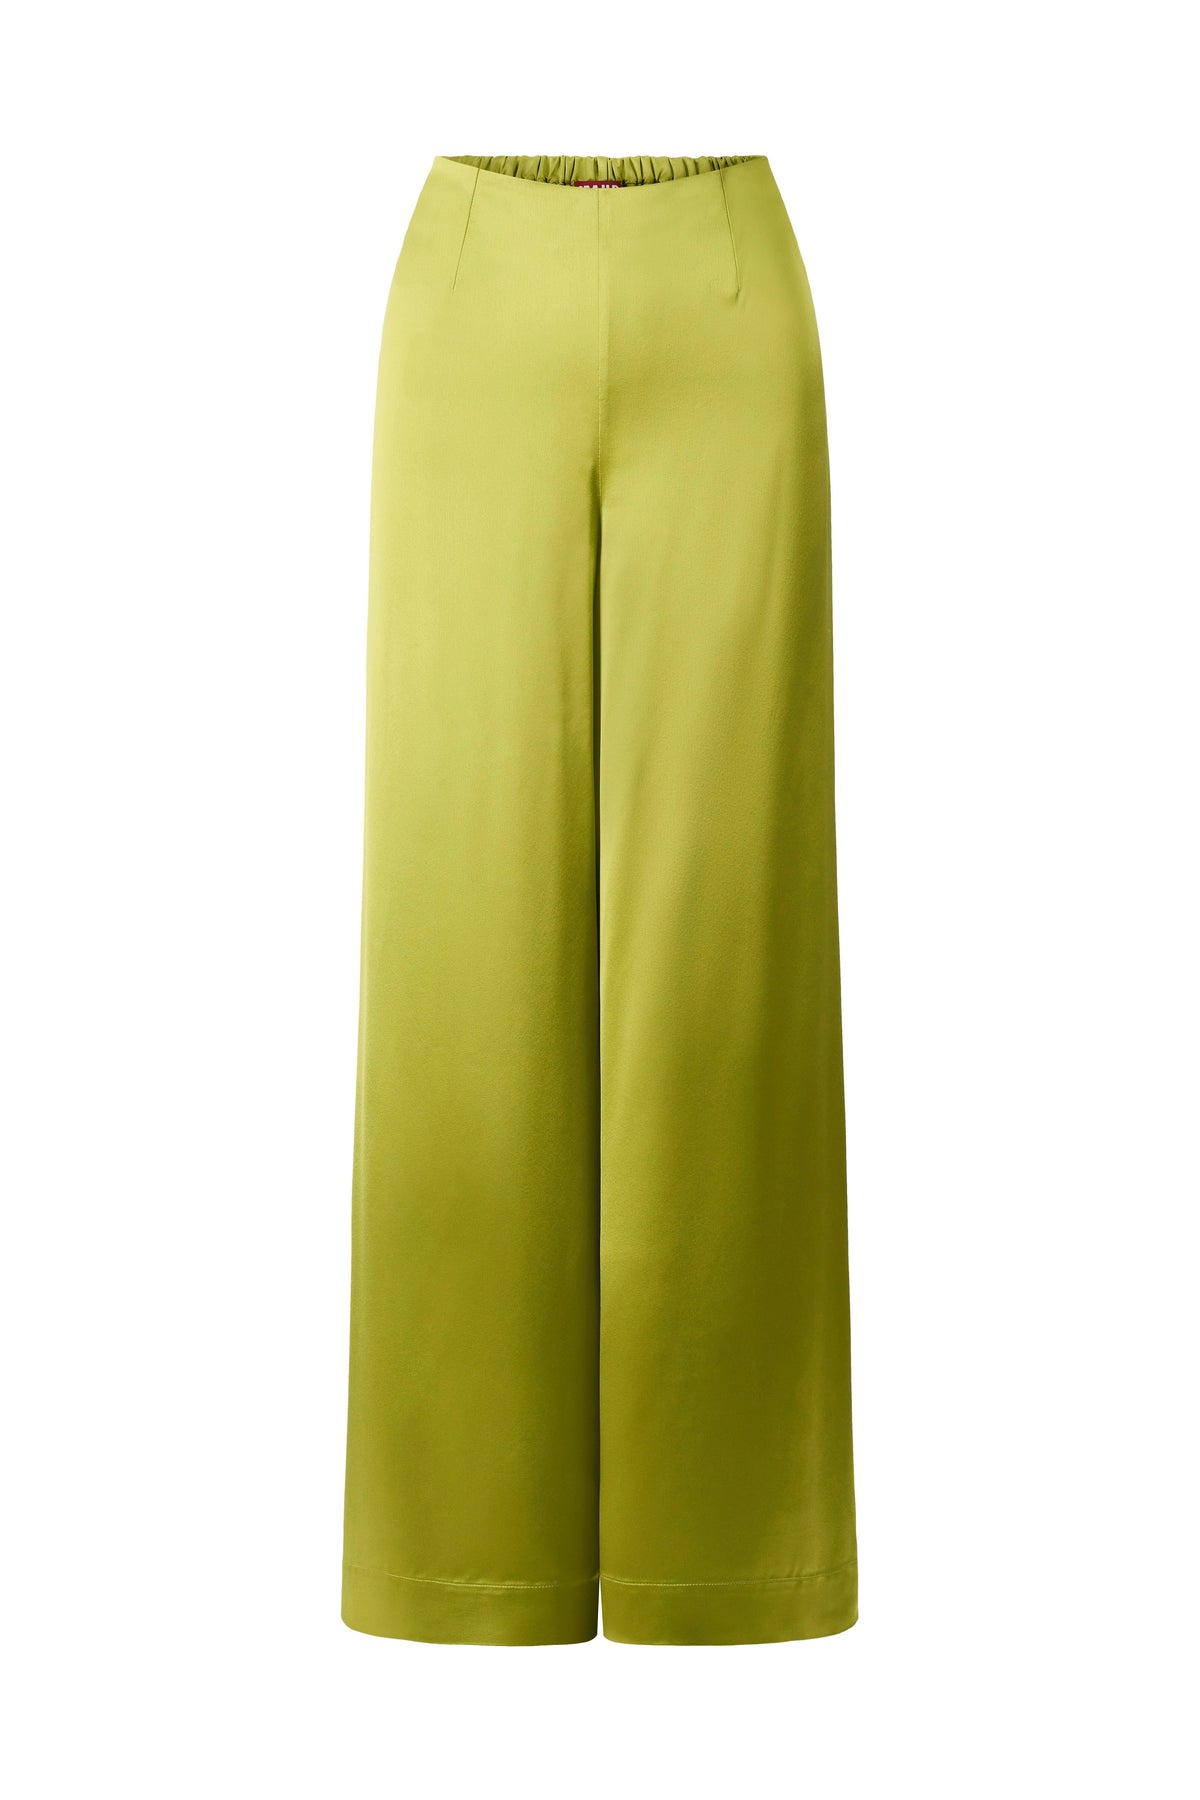 A complete guide to work trousers - Green Prophet